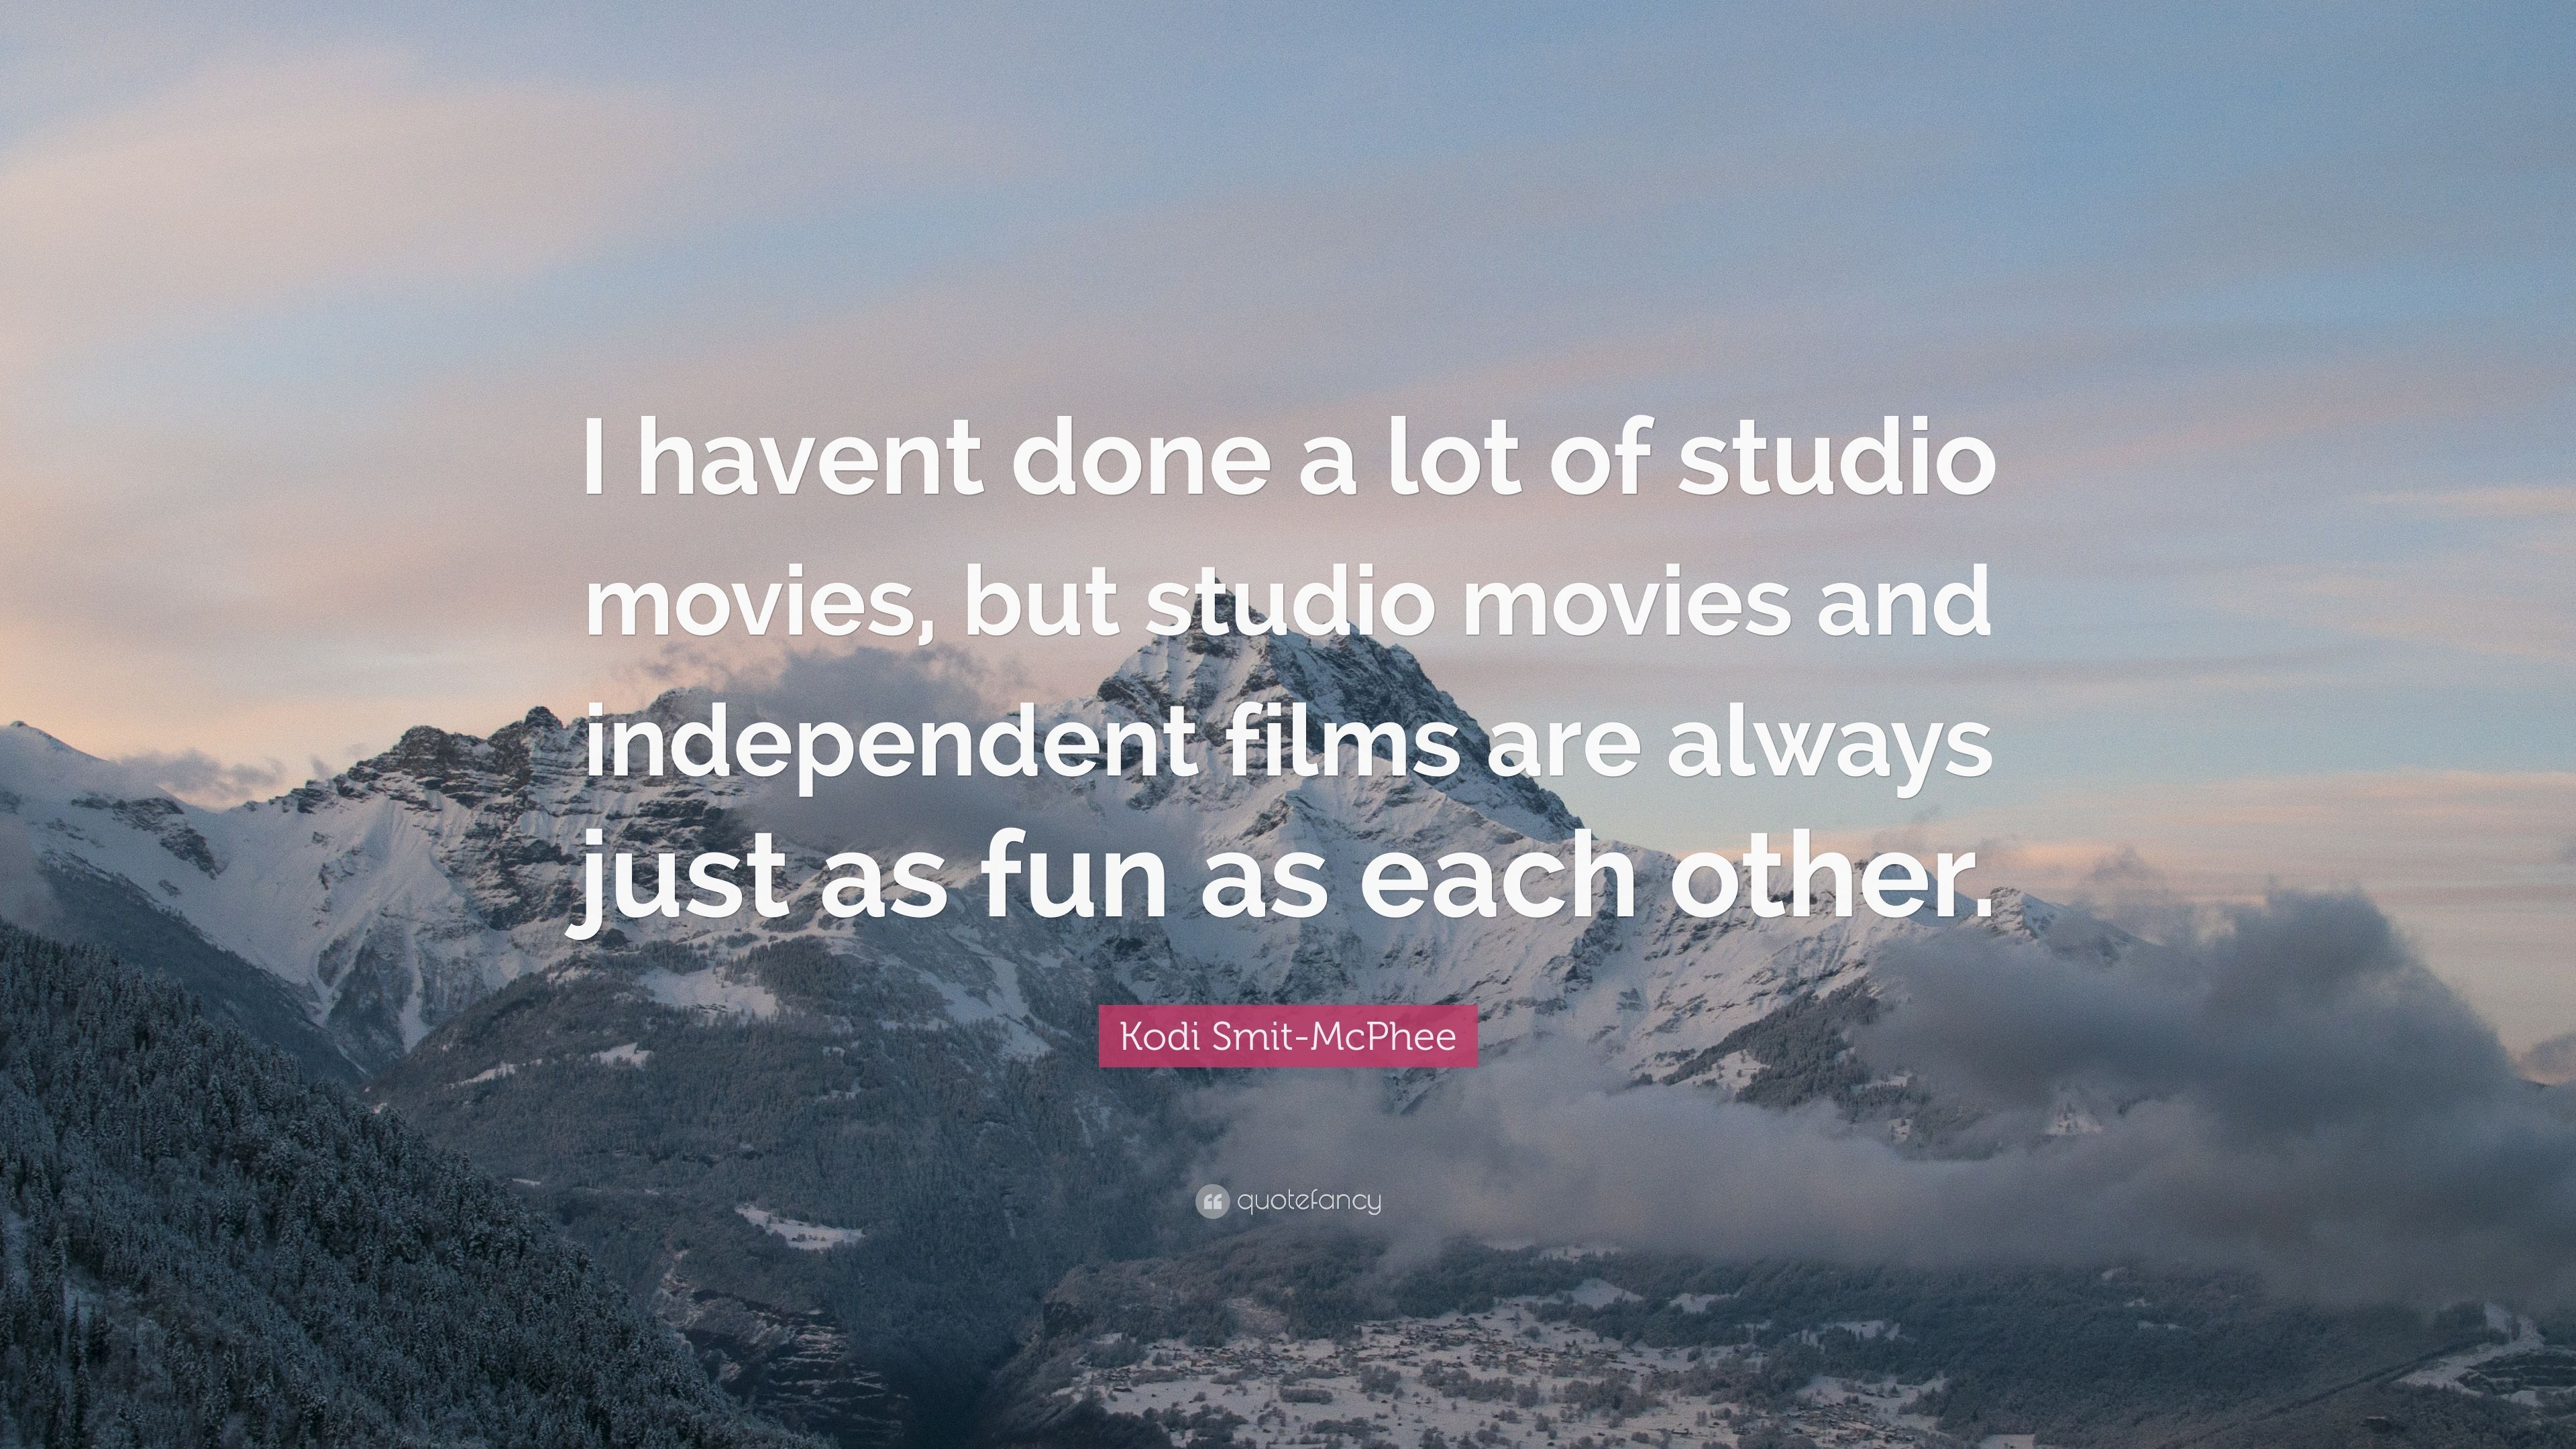 Kodi Smit McPhee Quote: “I Havent Done A Lot Of Studio Movies, But